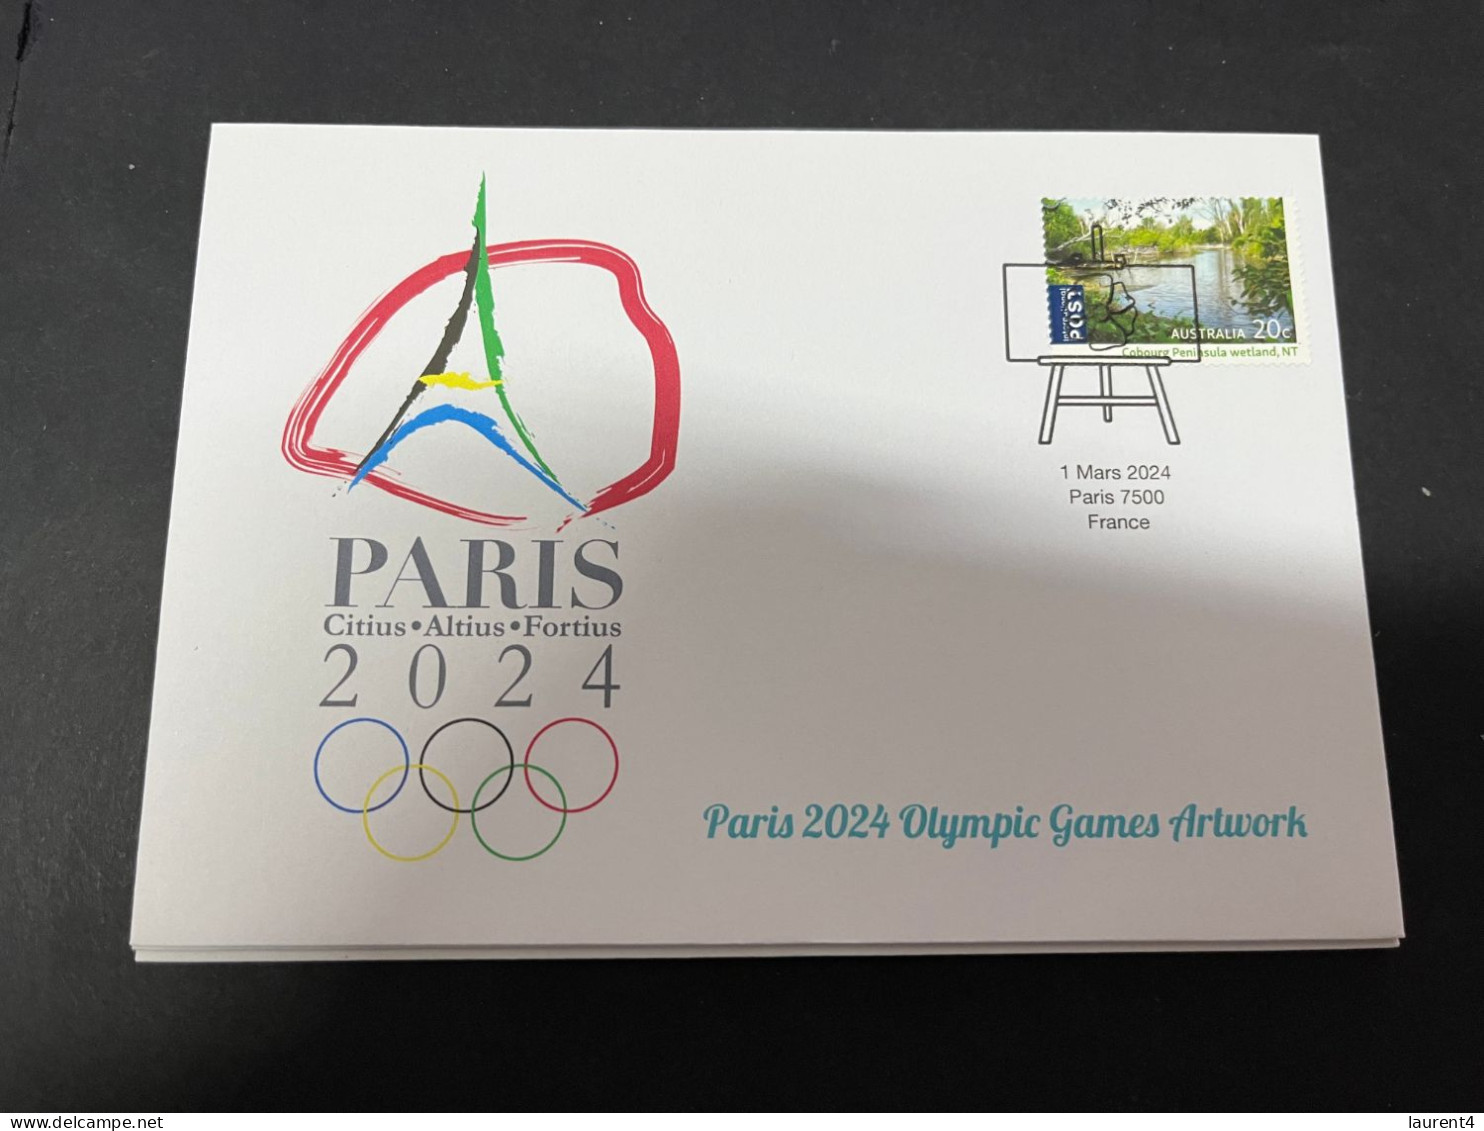 8-3-2024 (2 Y 30) Paris Olympic Games 2024 - 1 (of 12 Covers Series) For The Paris 2024 Olympic Games Artwork - Sommer 2024: Paris